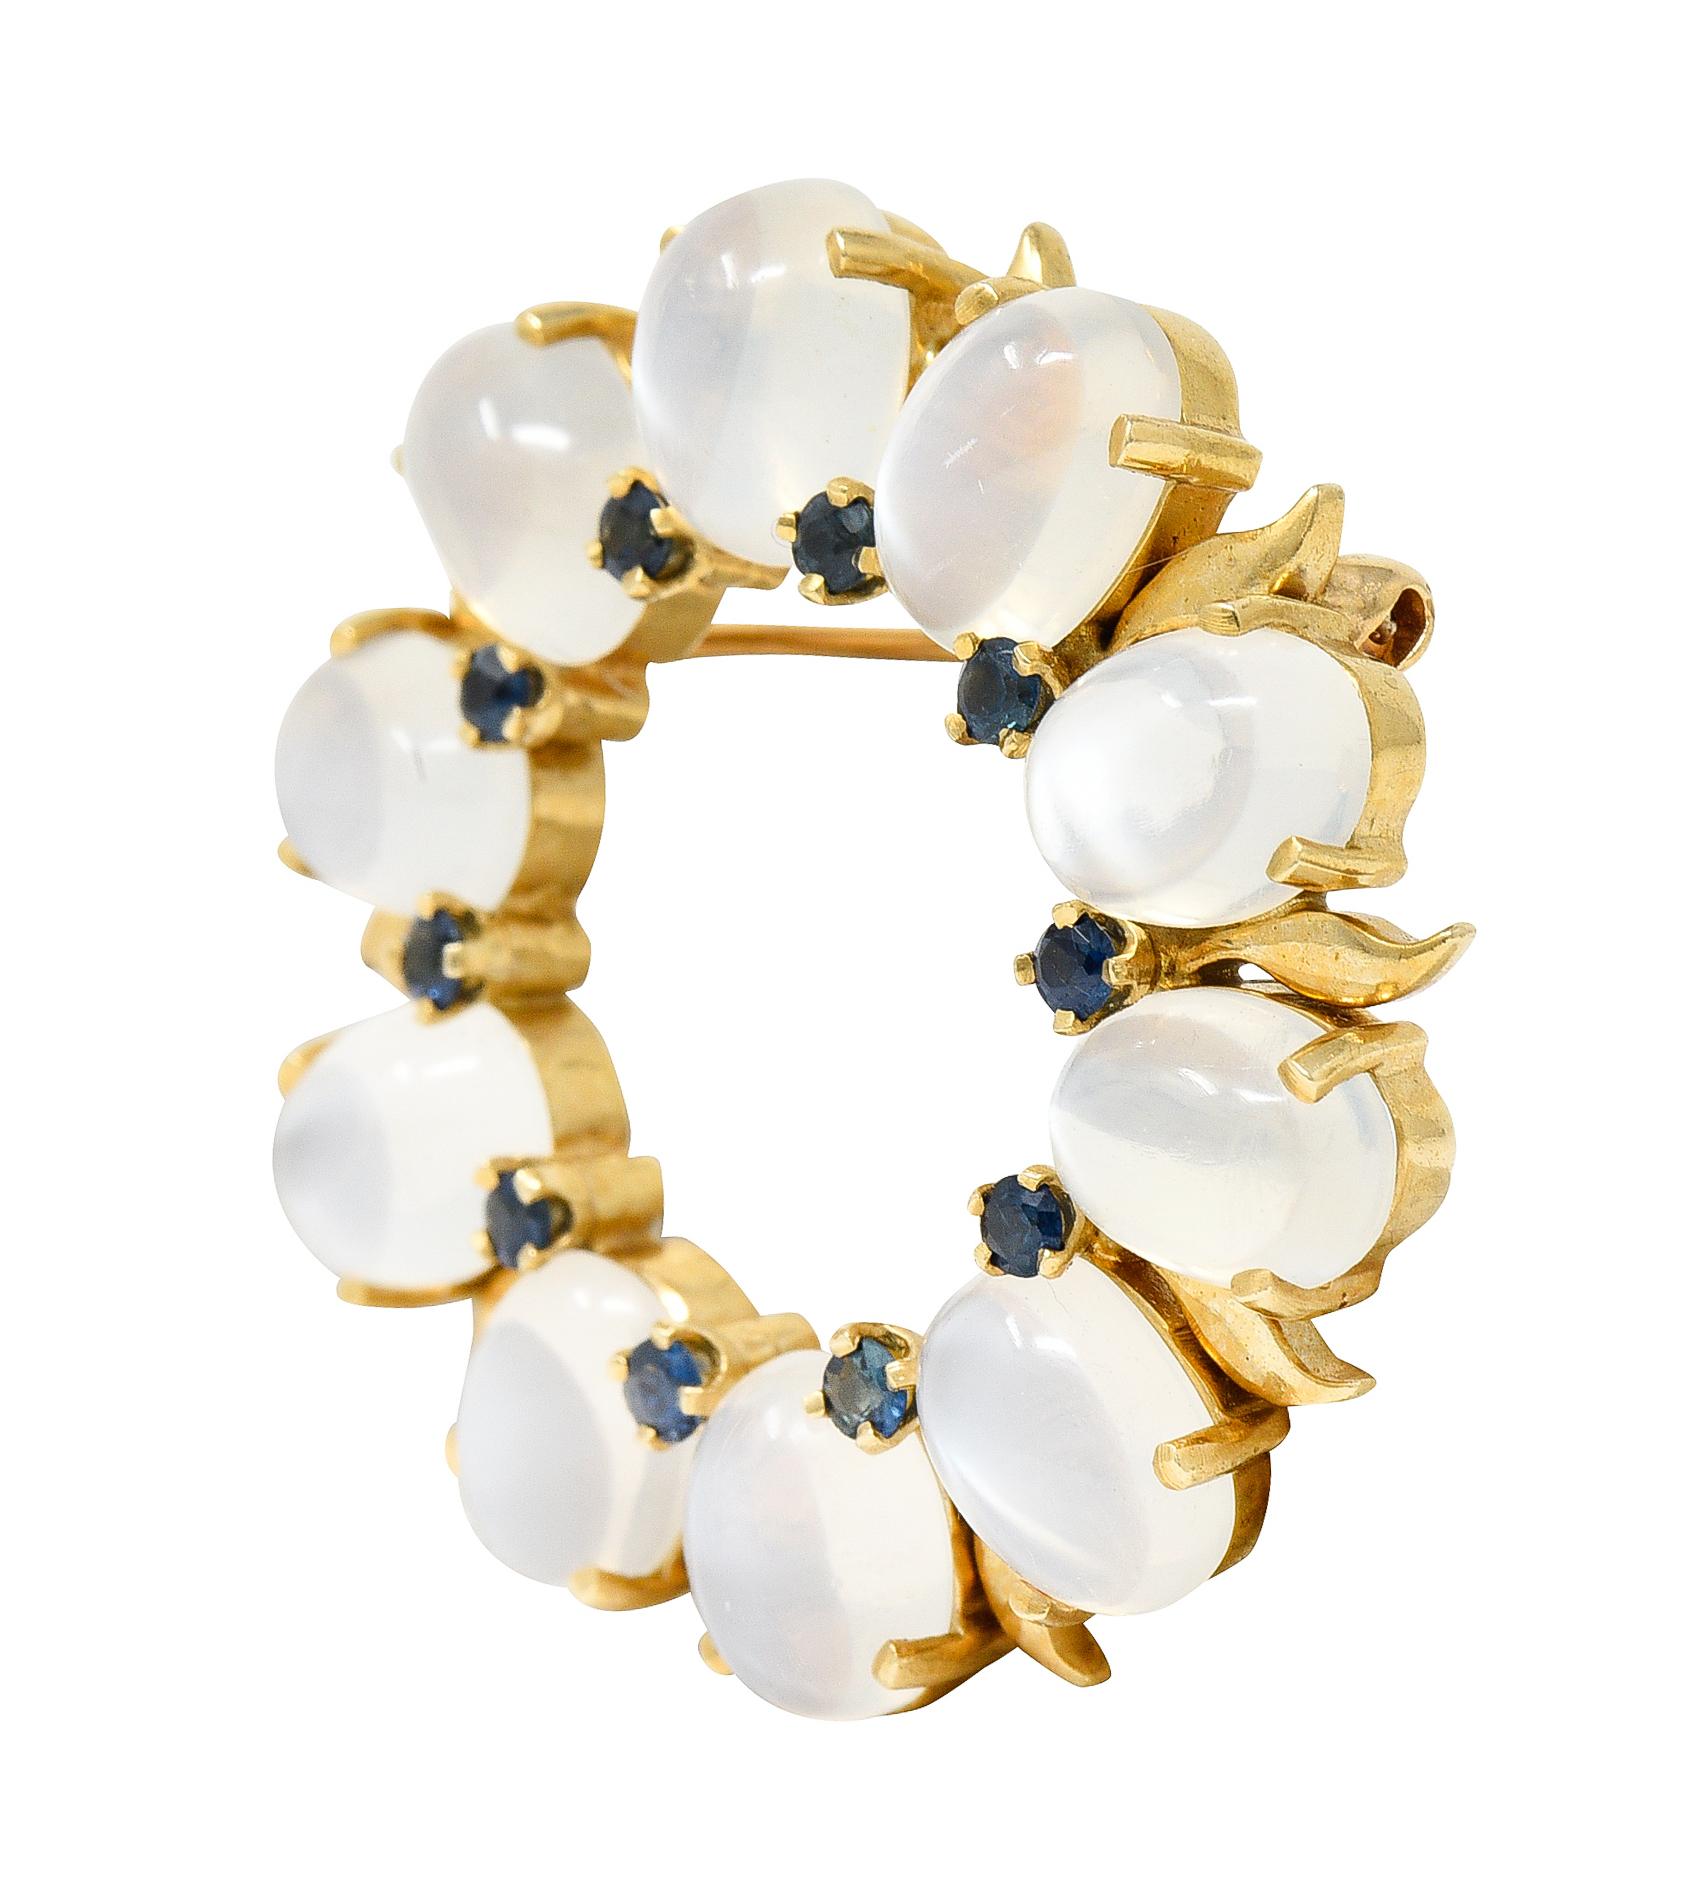 Circular brooch is a radial pattern with prong set gemstones and high polished gold leaf motif

Featuring 6.0 x 8.0 mm oval cabochon moonstones - translucent with billowing white adularescence

Alternating with round cut sapphires - weighing